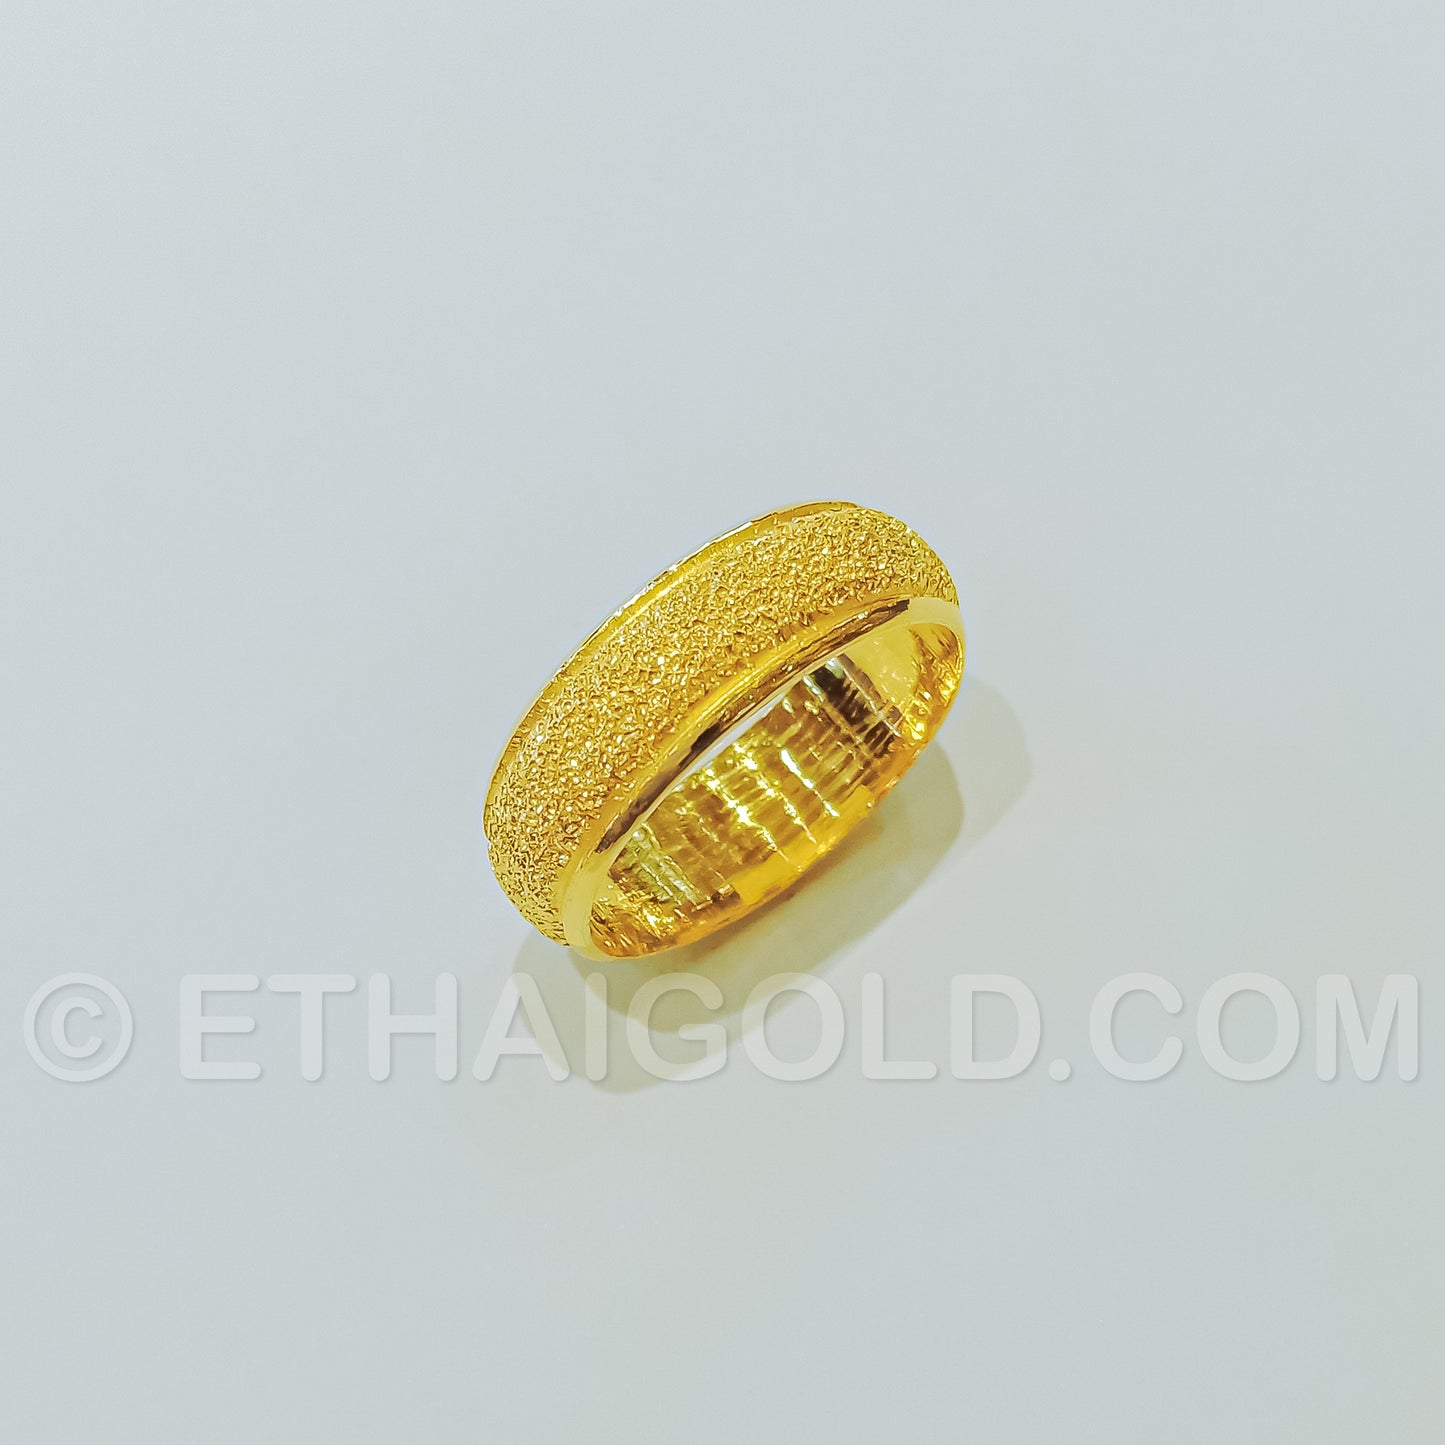 1/2 BAHT POLISHED SPARKLING SOLID DOMED WEDDING BAND RING IN 23K GOLD (ID: R0202S)